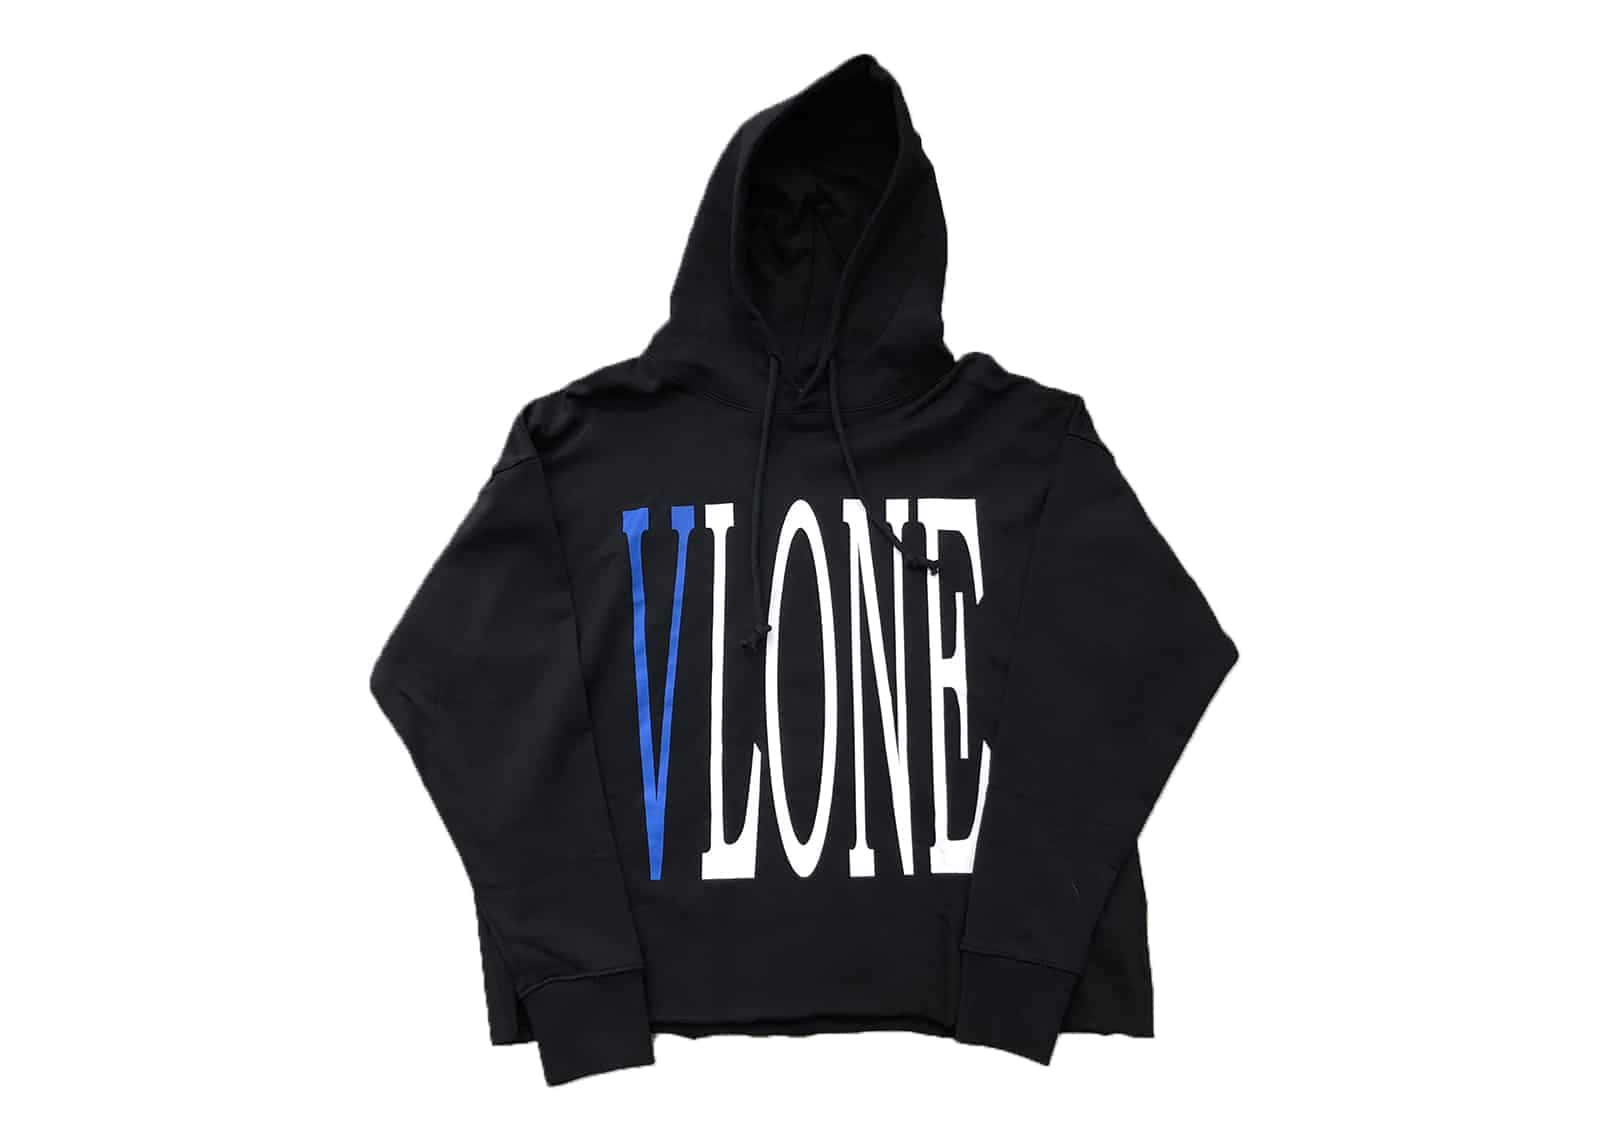 Caption: Vlone Logo on Abstract Gradient Background